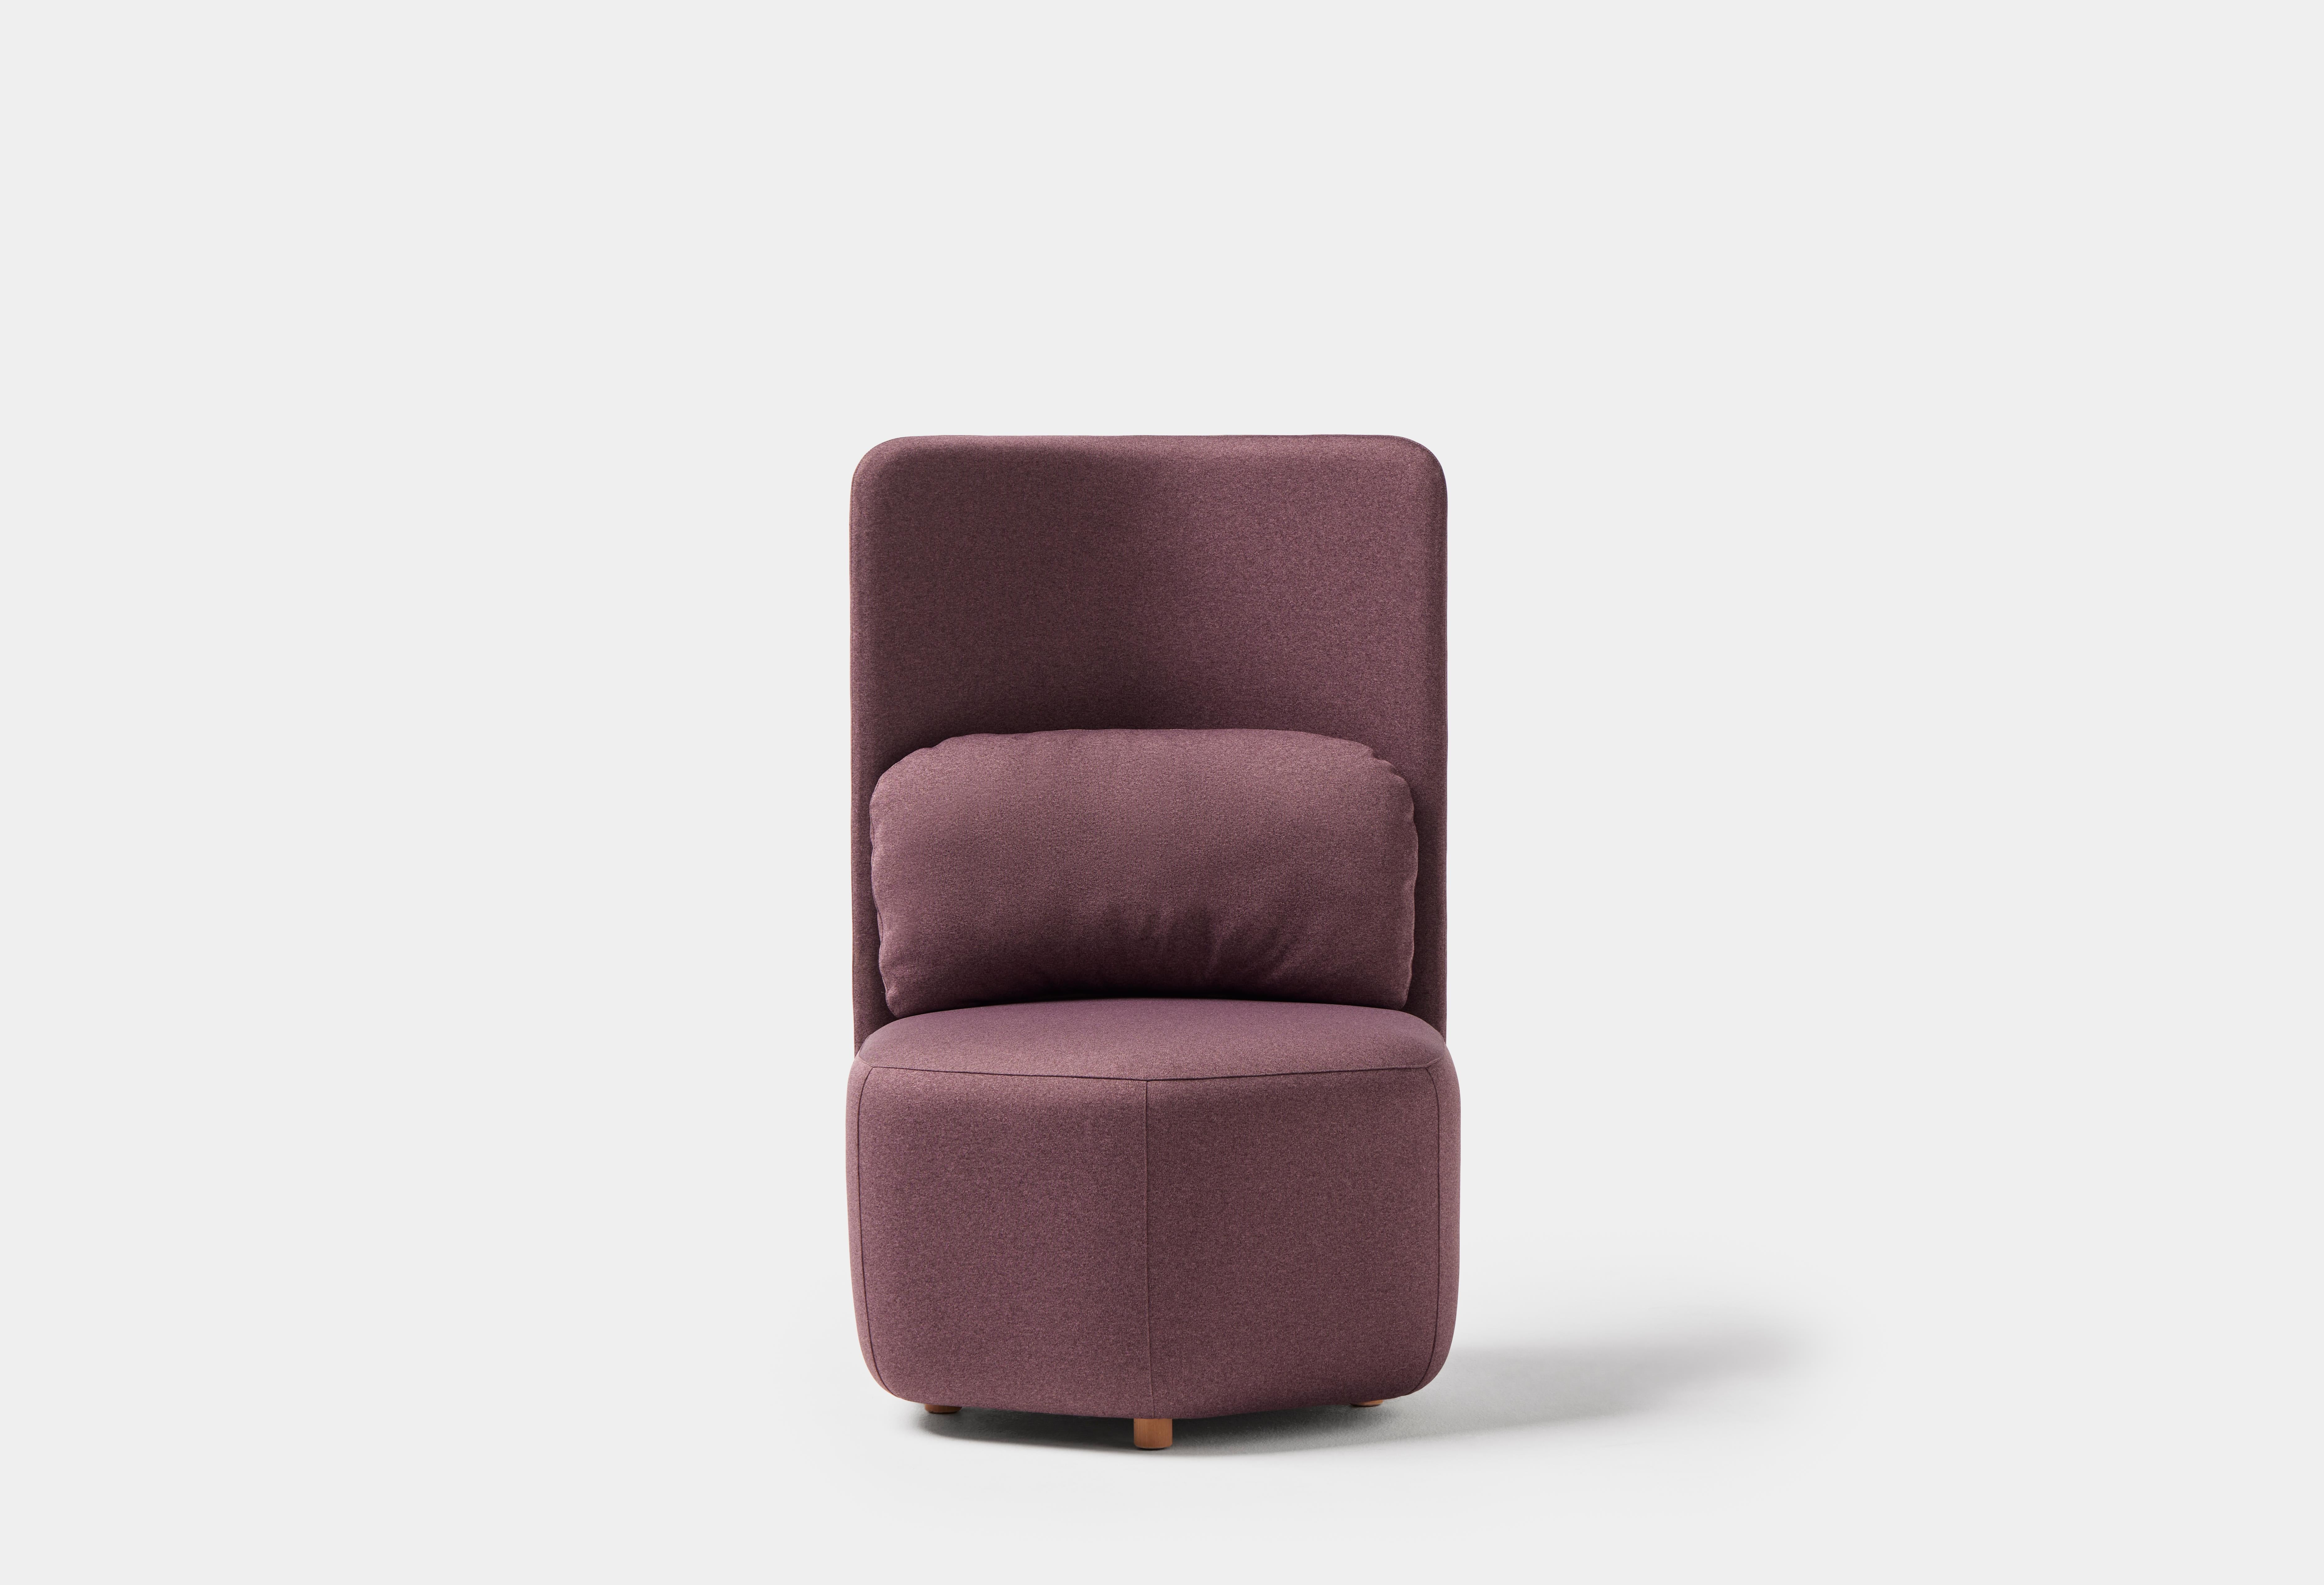 HEX armchair with high backrest without side panels by Pepe Albargues
Dimensions: W 70 x D 77 x H 107 x seat 44.
Materials: Pine wood and tablex seat structure. Backrest with metal frame, plywood and tablex board. Foam CMHR (high resilience and